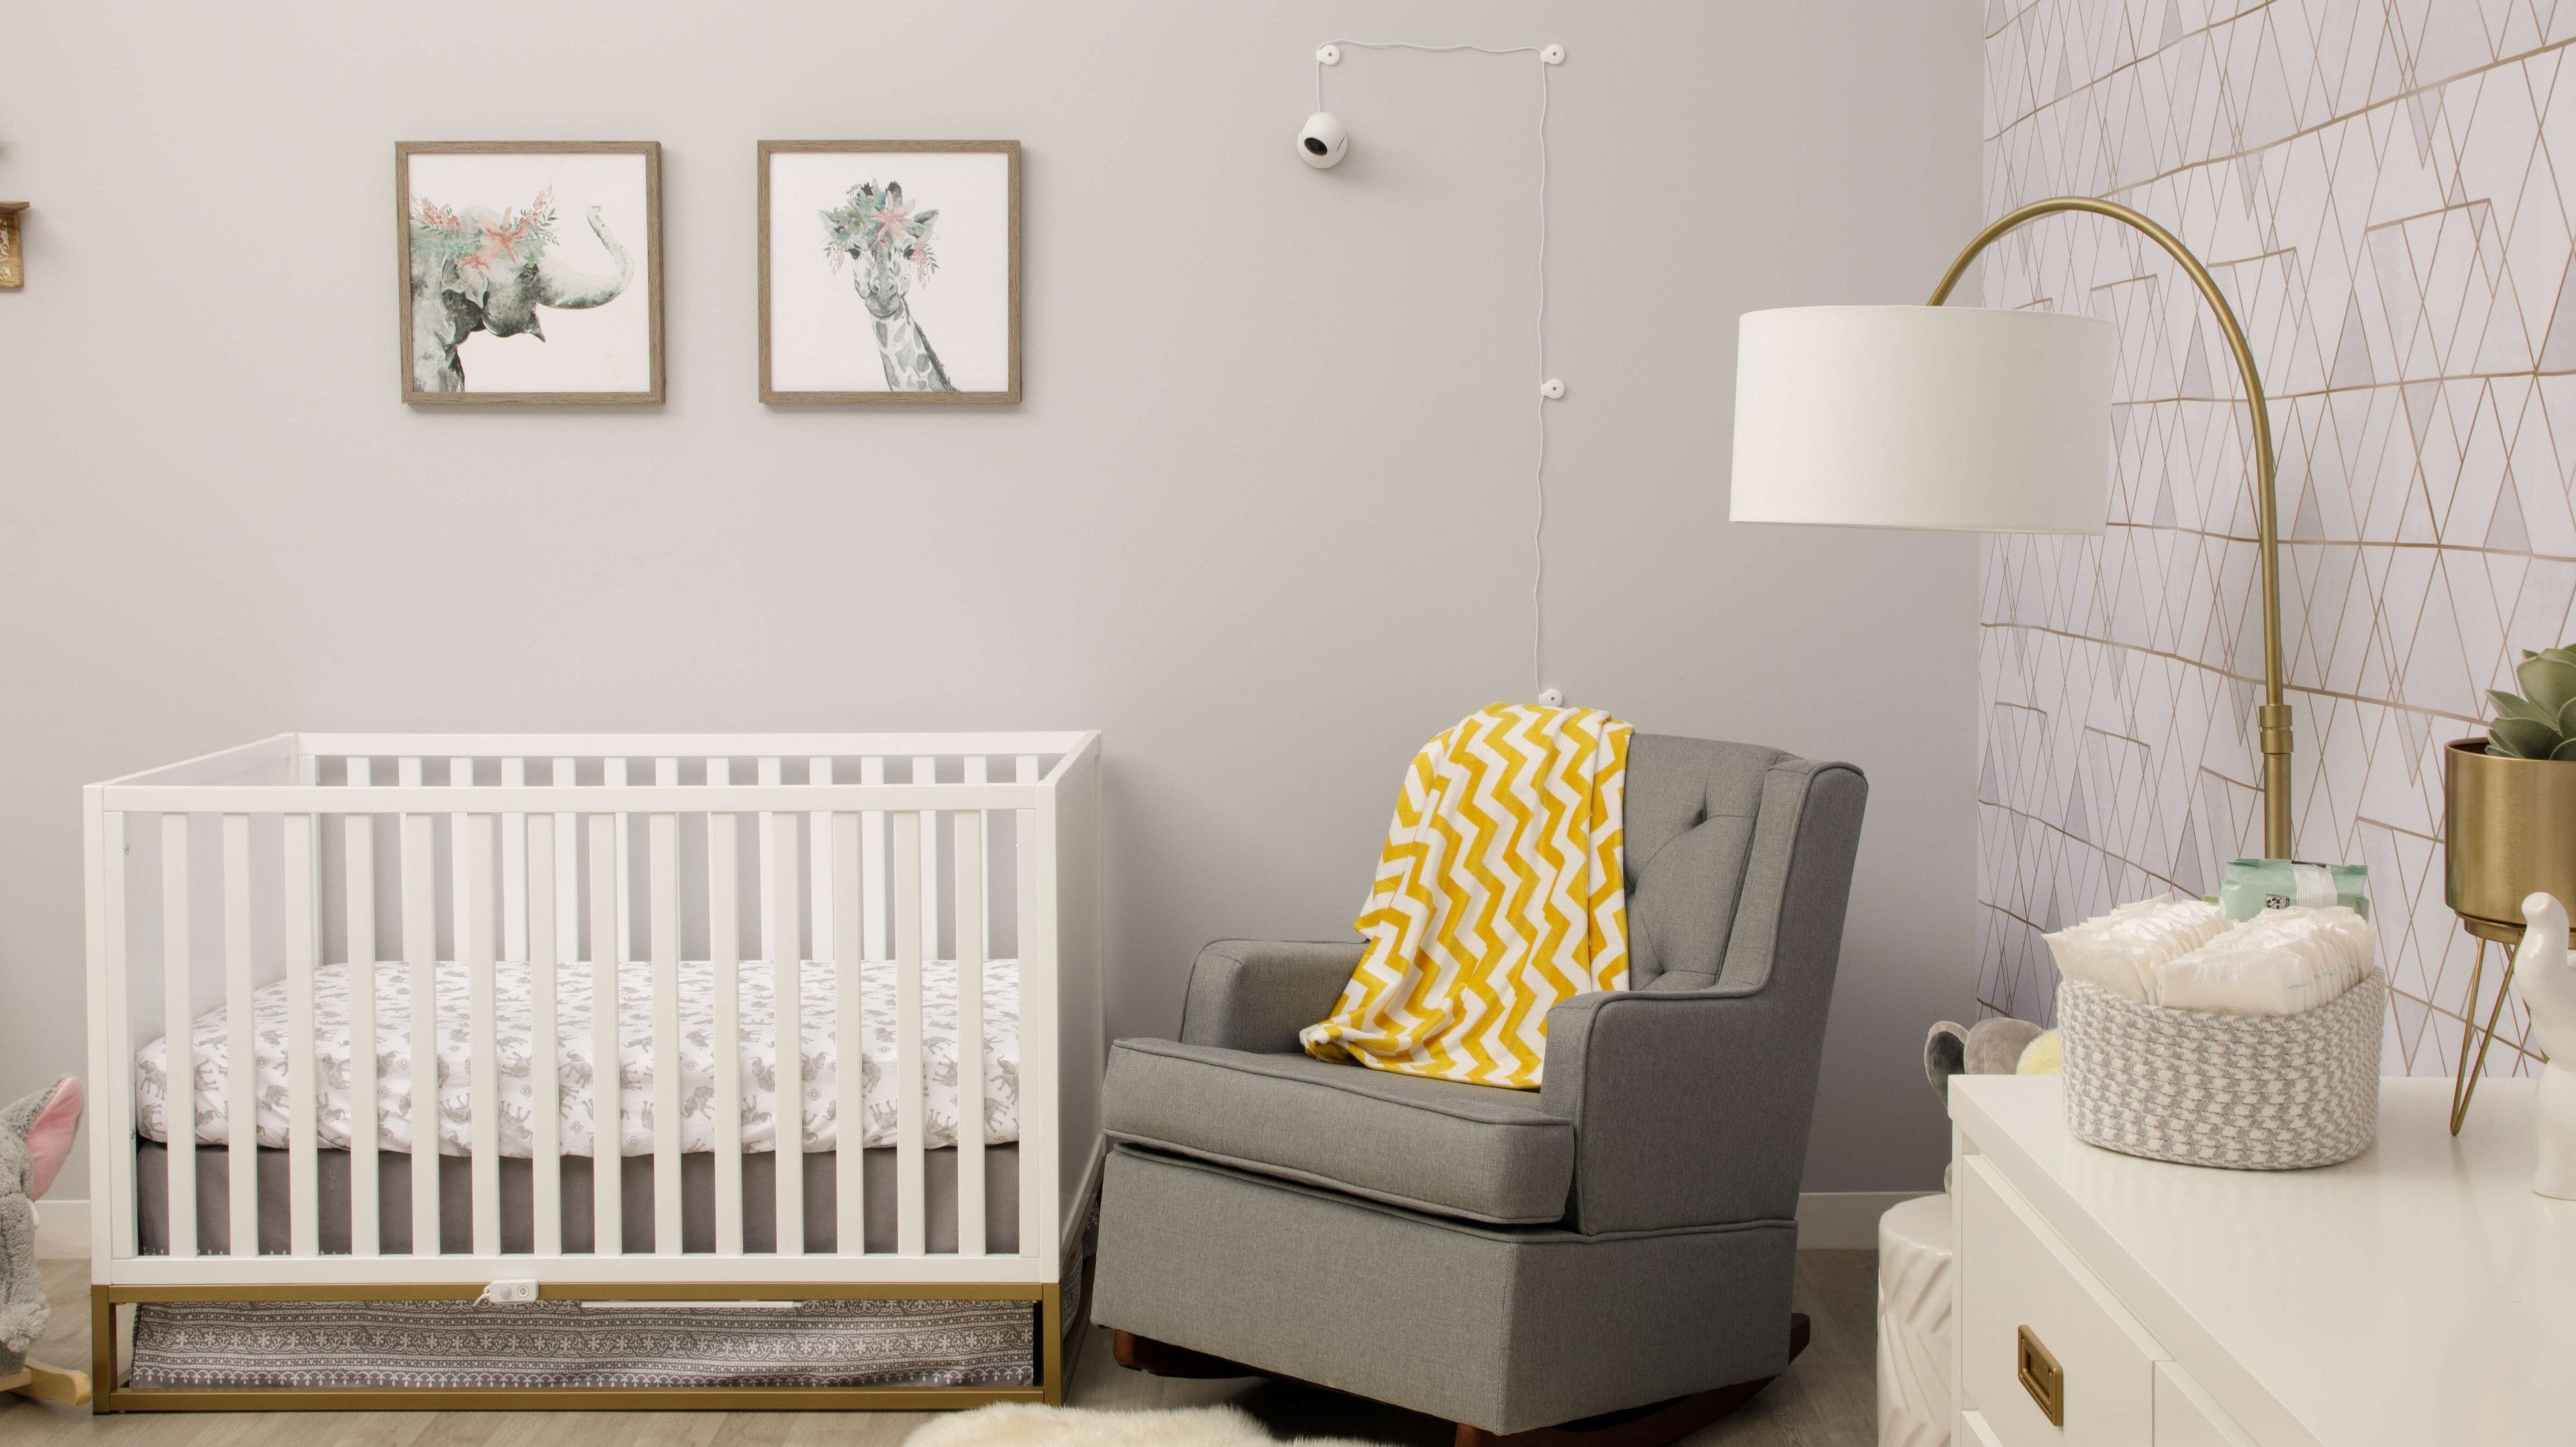 Childproofing Room to Room: The Nursery